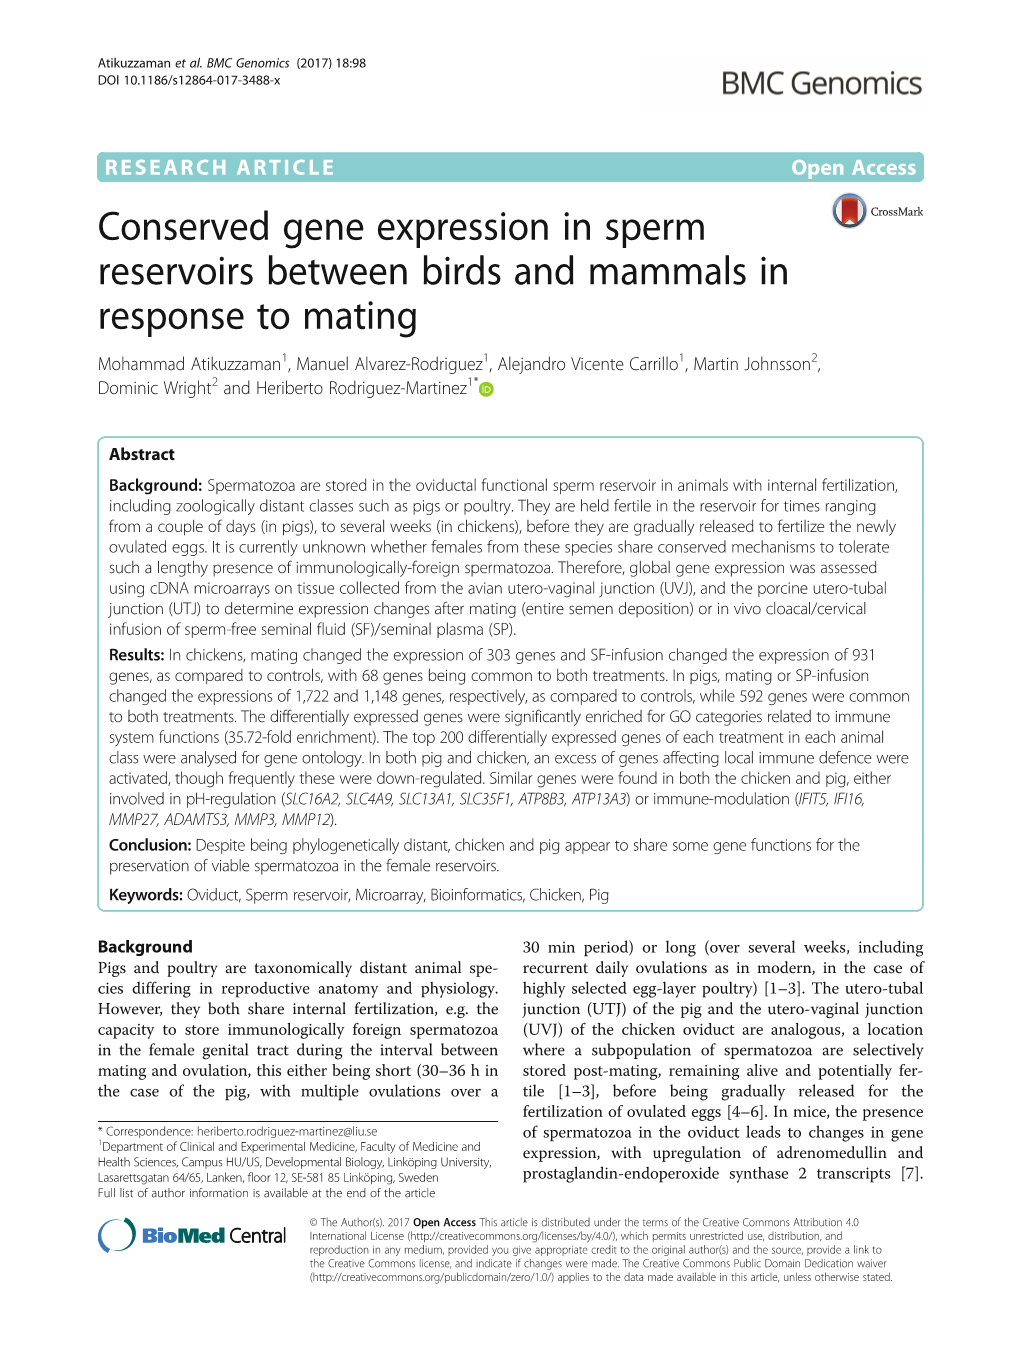 Conserved Gene Expression in Sperm Reservoirs Between Birds and Mammals in Response to Mating